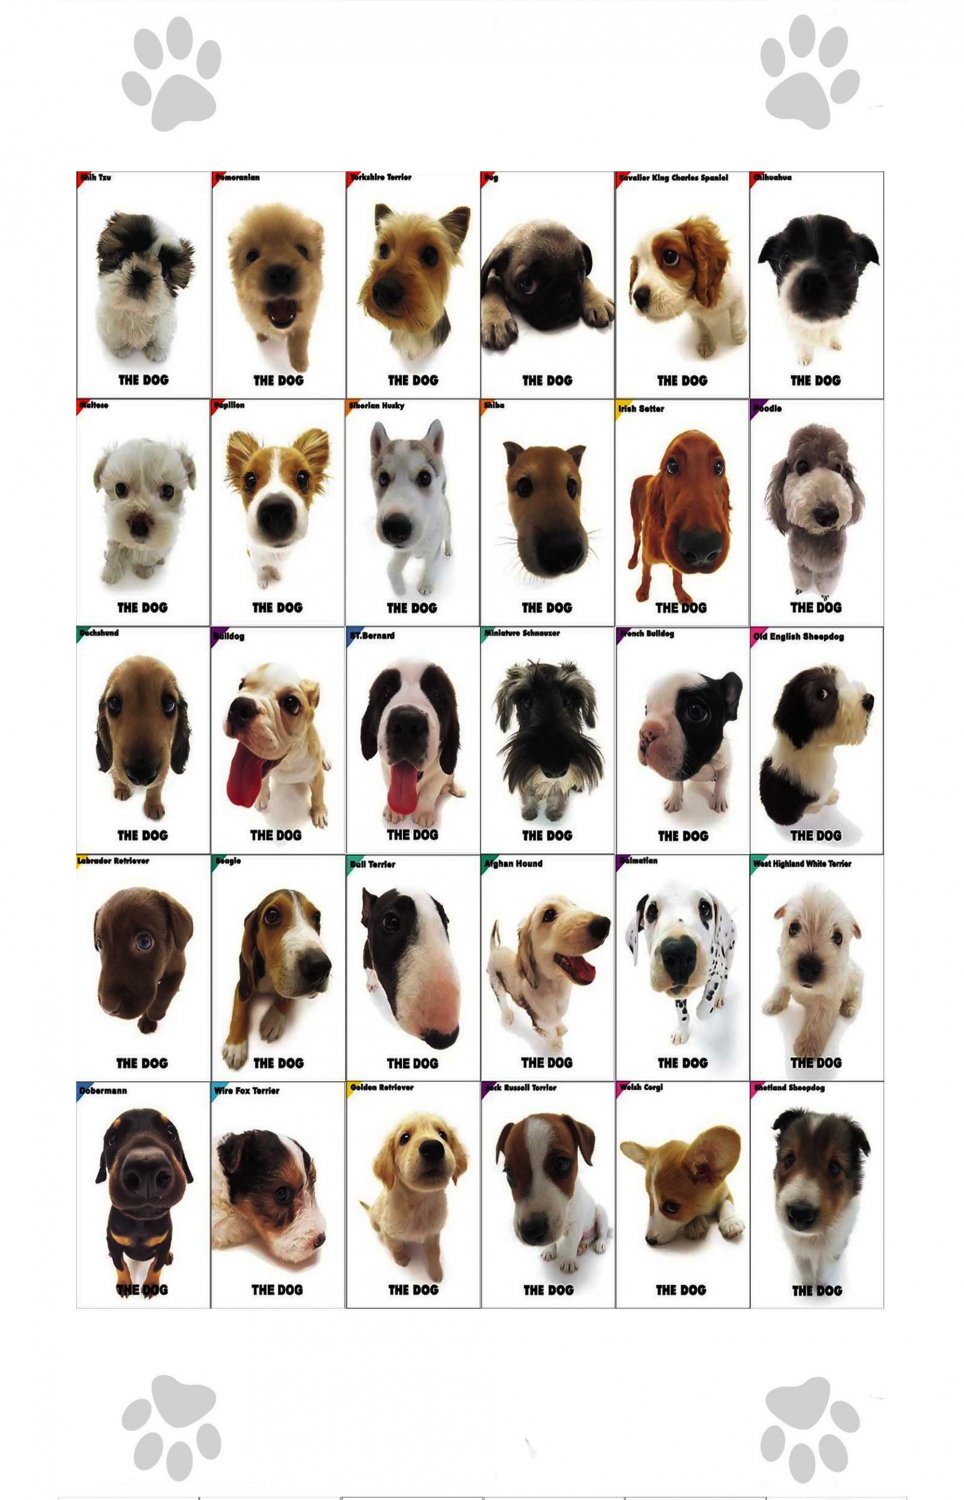 the-dog-different-dog-breeds-infographic-chart-18-x28-45cm-70cm-poster